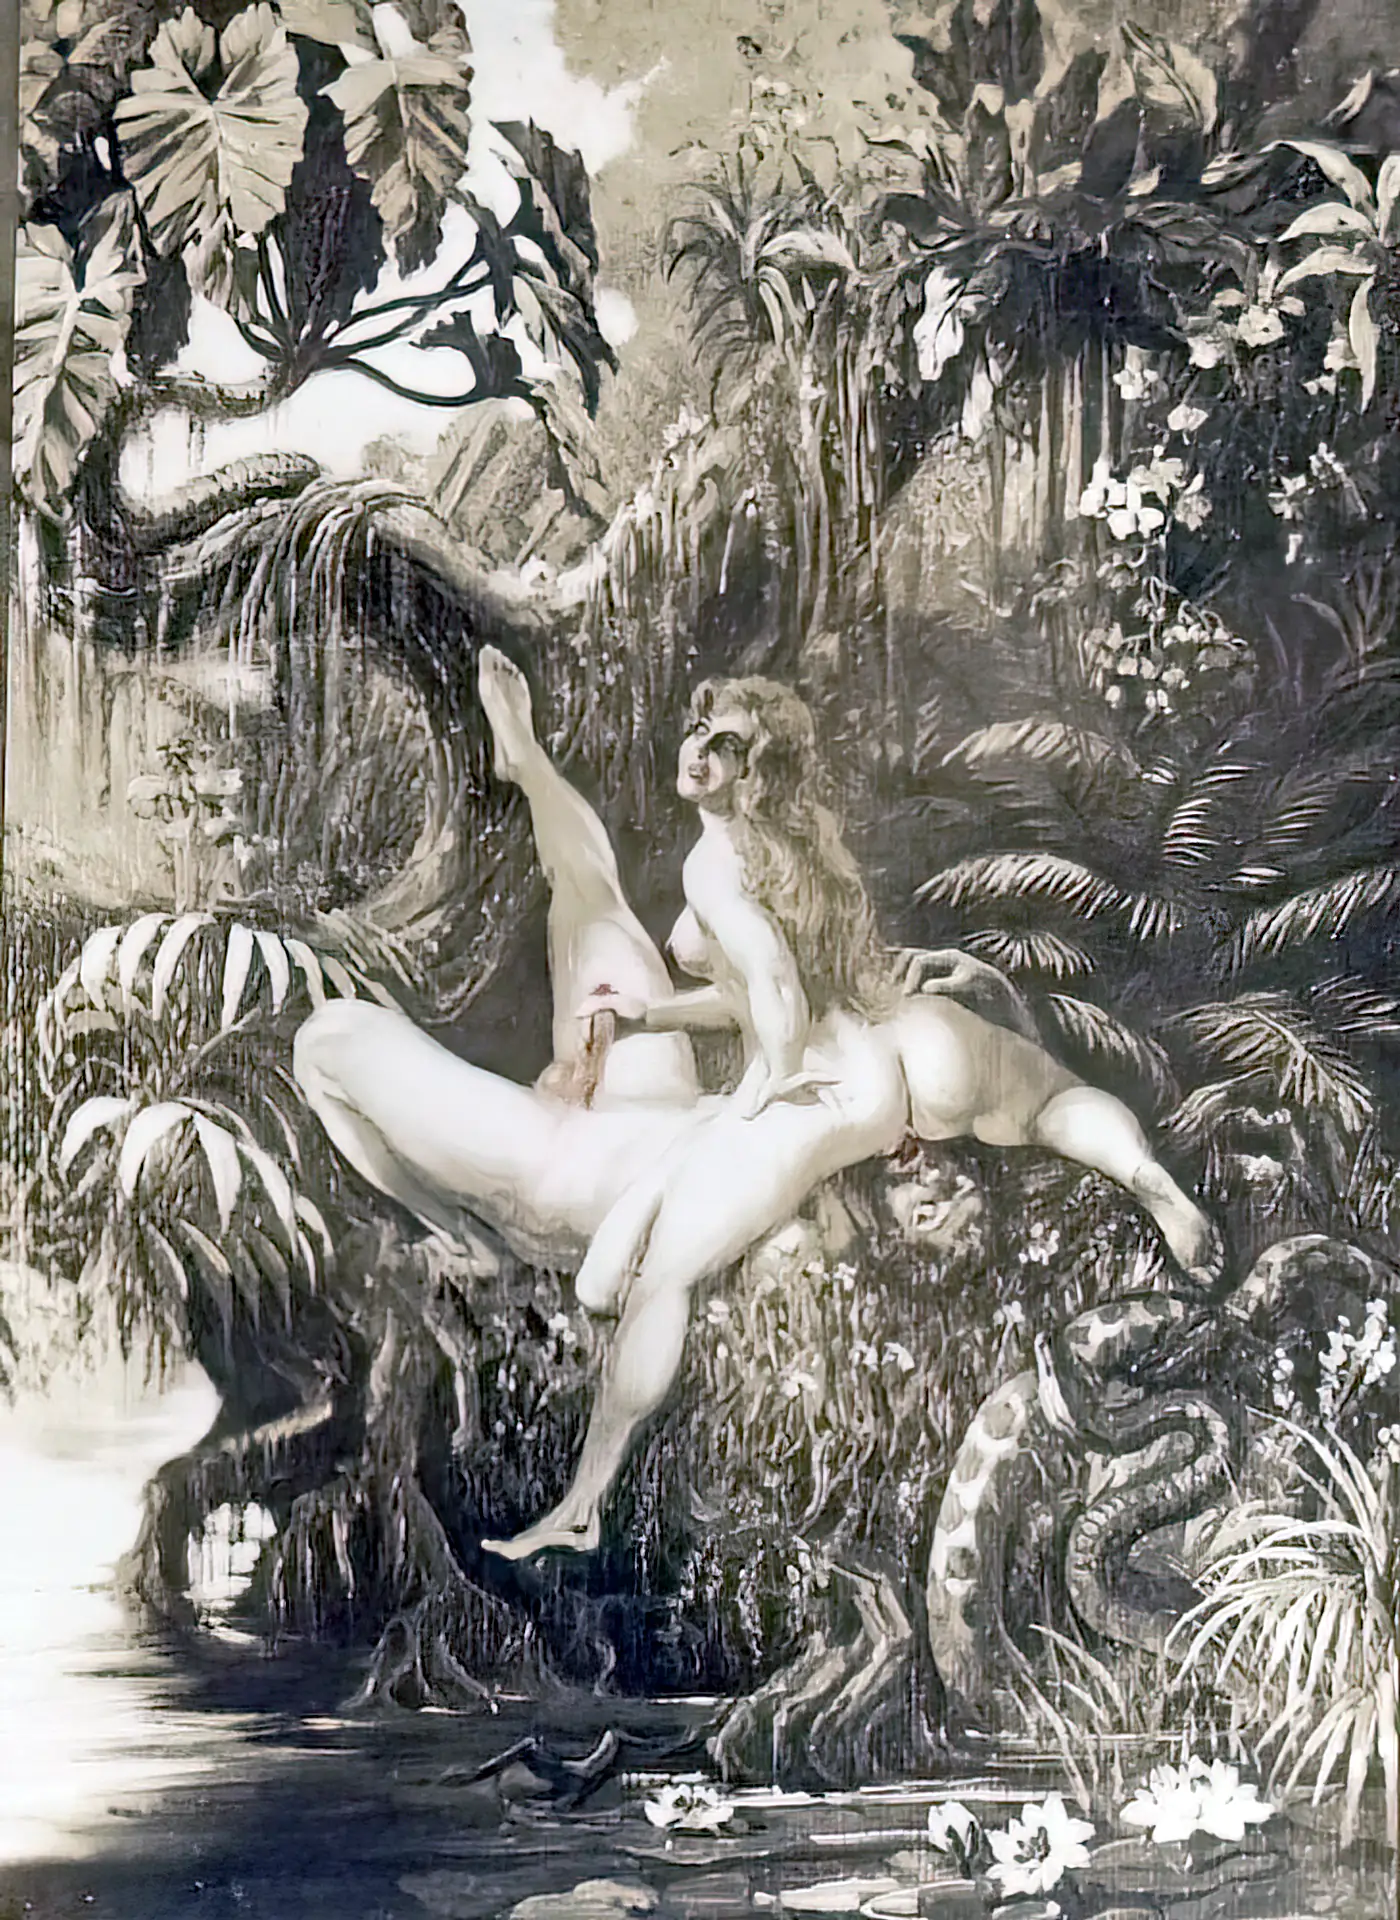 Vintage pussy licking porn photo Classic Adam and Eve goes down on each other in the garden